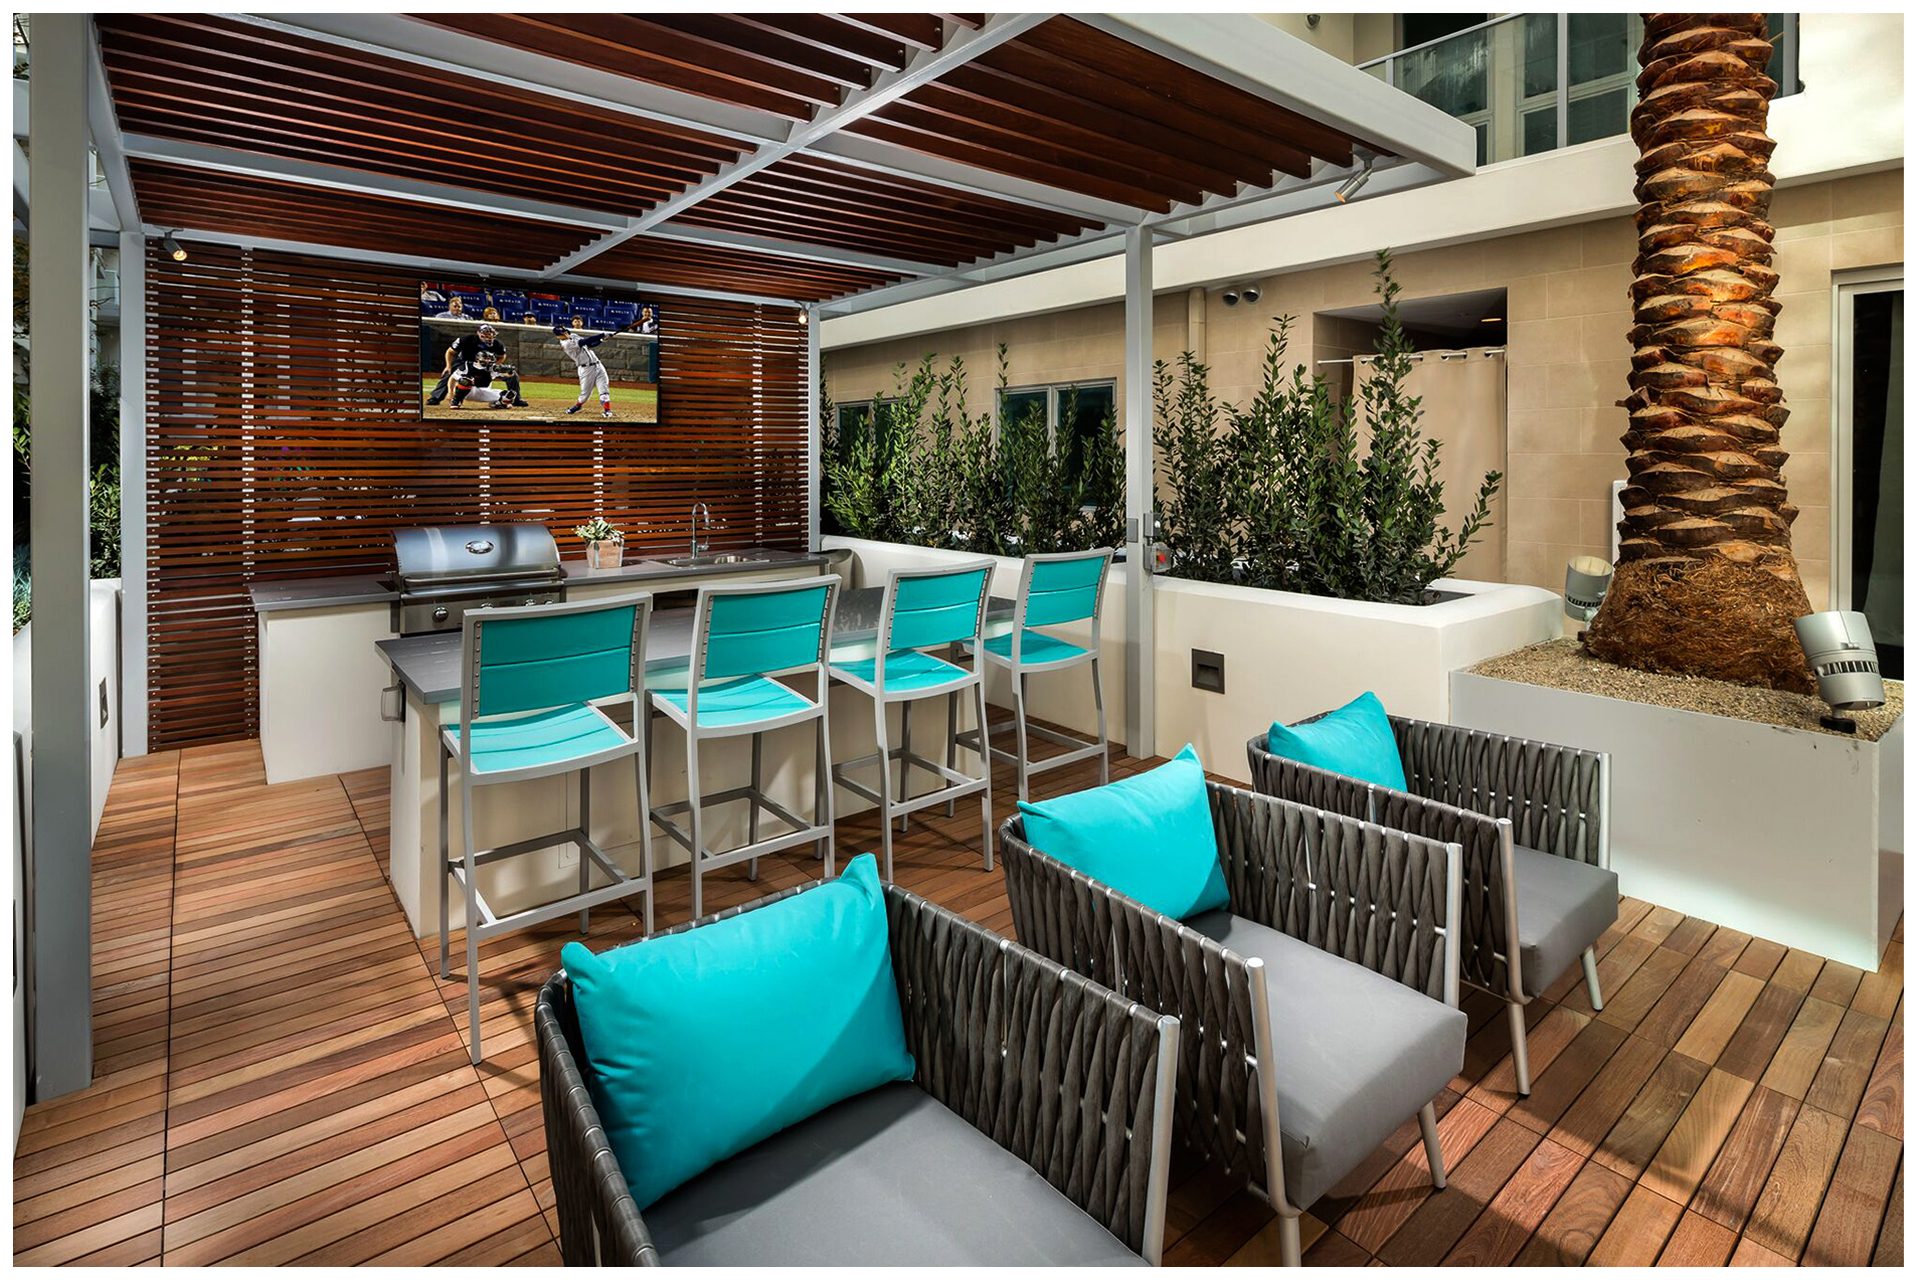 COURTYARD, POOL AREA, & SKY BRIDGE PROVISIONSCourtyard, Pool Area, & Sky Deck Audio Video & Enterprise Grade WiFi. Audio Video provisions are controlled via a nearby wall-mounted iPad and remotely from leasing office iPad. Local iPad allows a limited range of volume change for music.